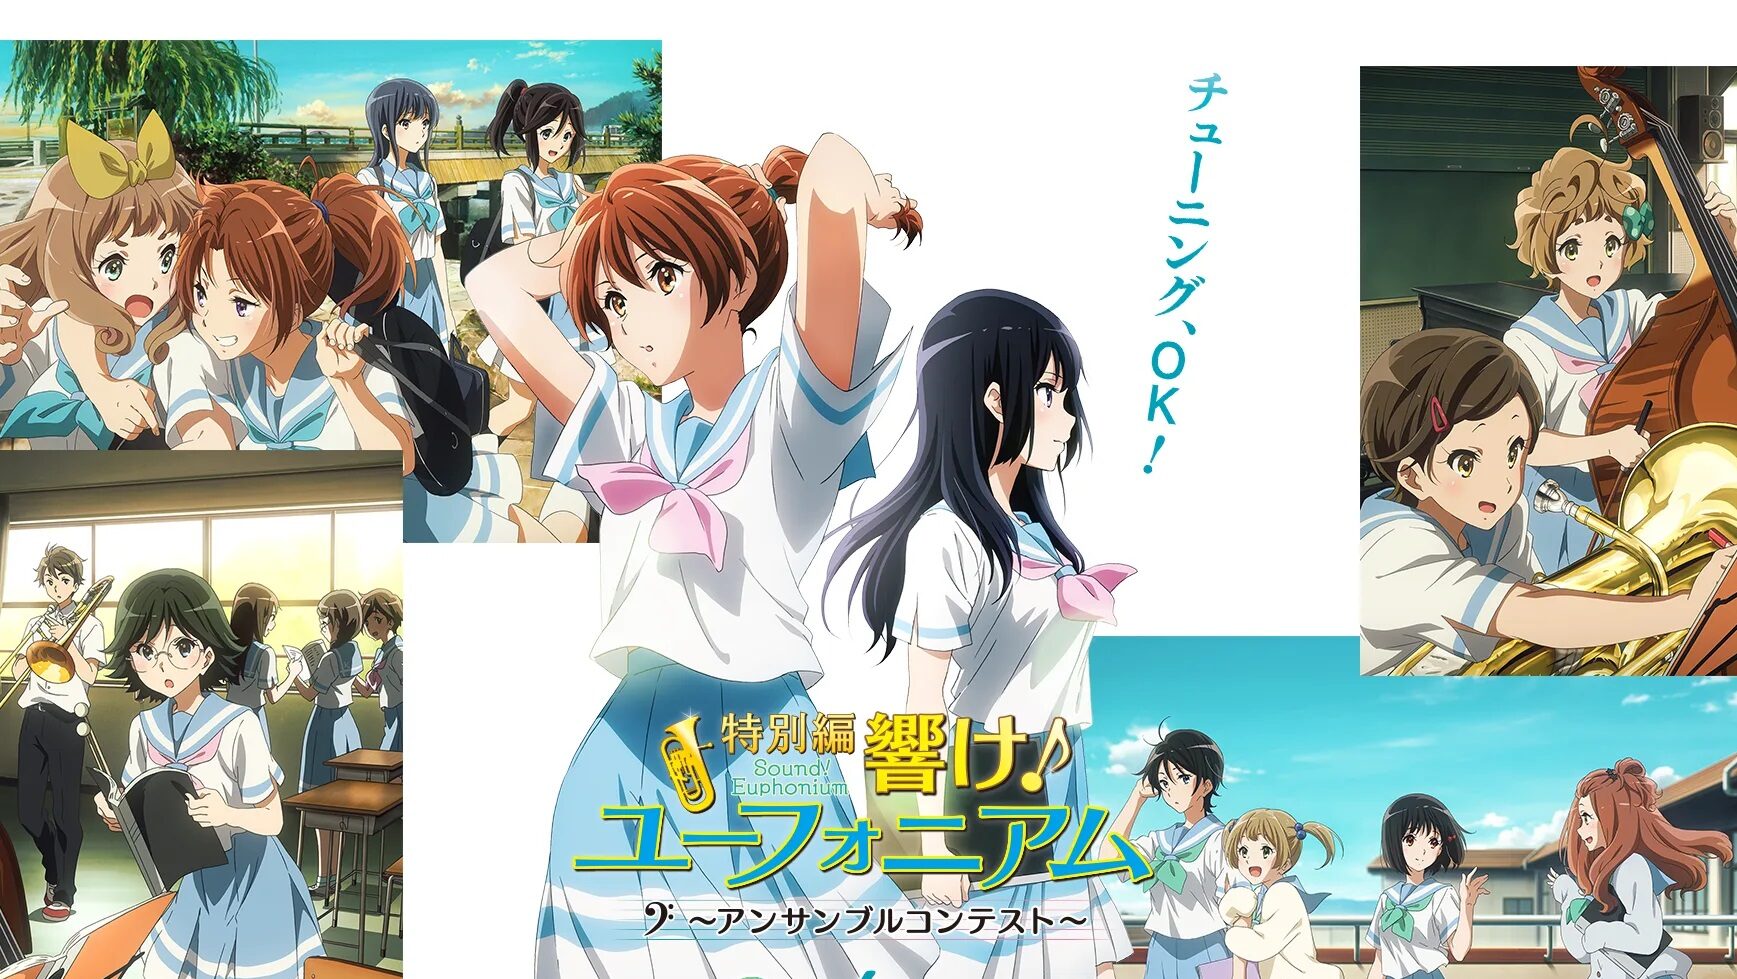 Sound Euphonium: Ensemble Contest hits Japanese theaters this summer